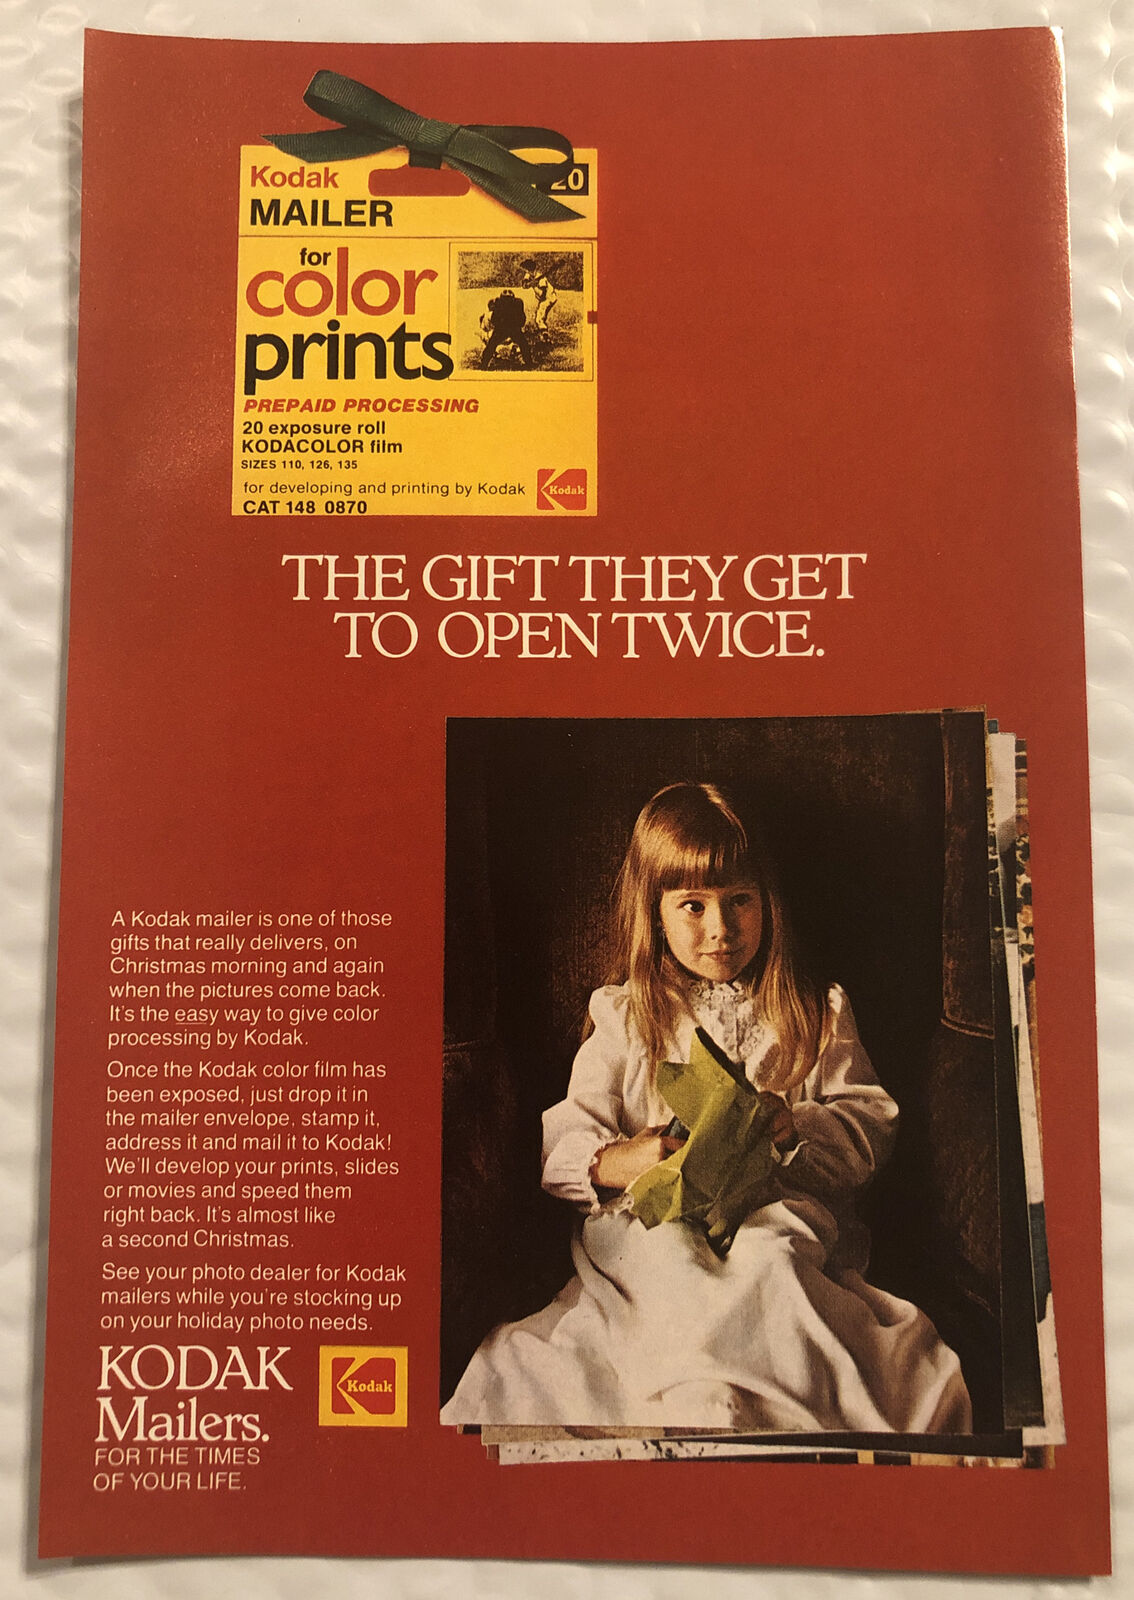 Vintage 1975 Kodak Mailers Print Ad Full Page - The Gift They Can Open Twice